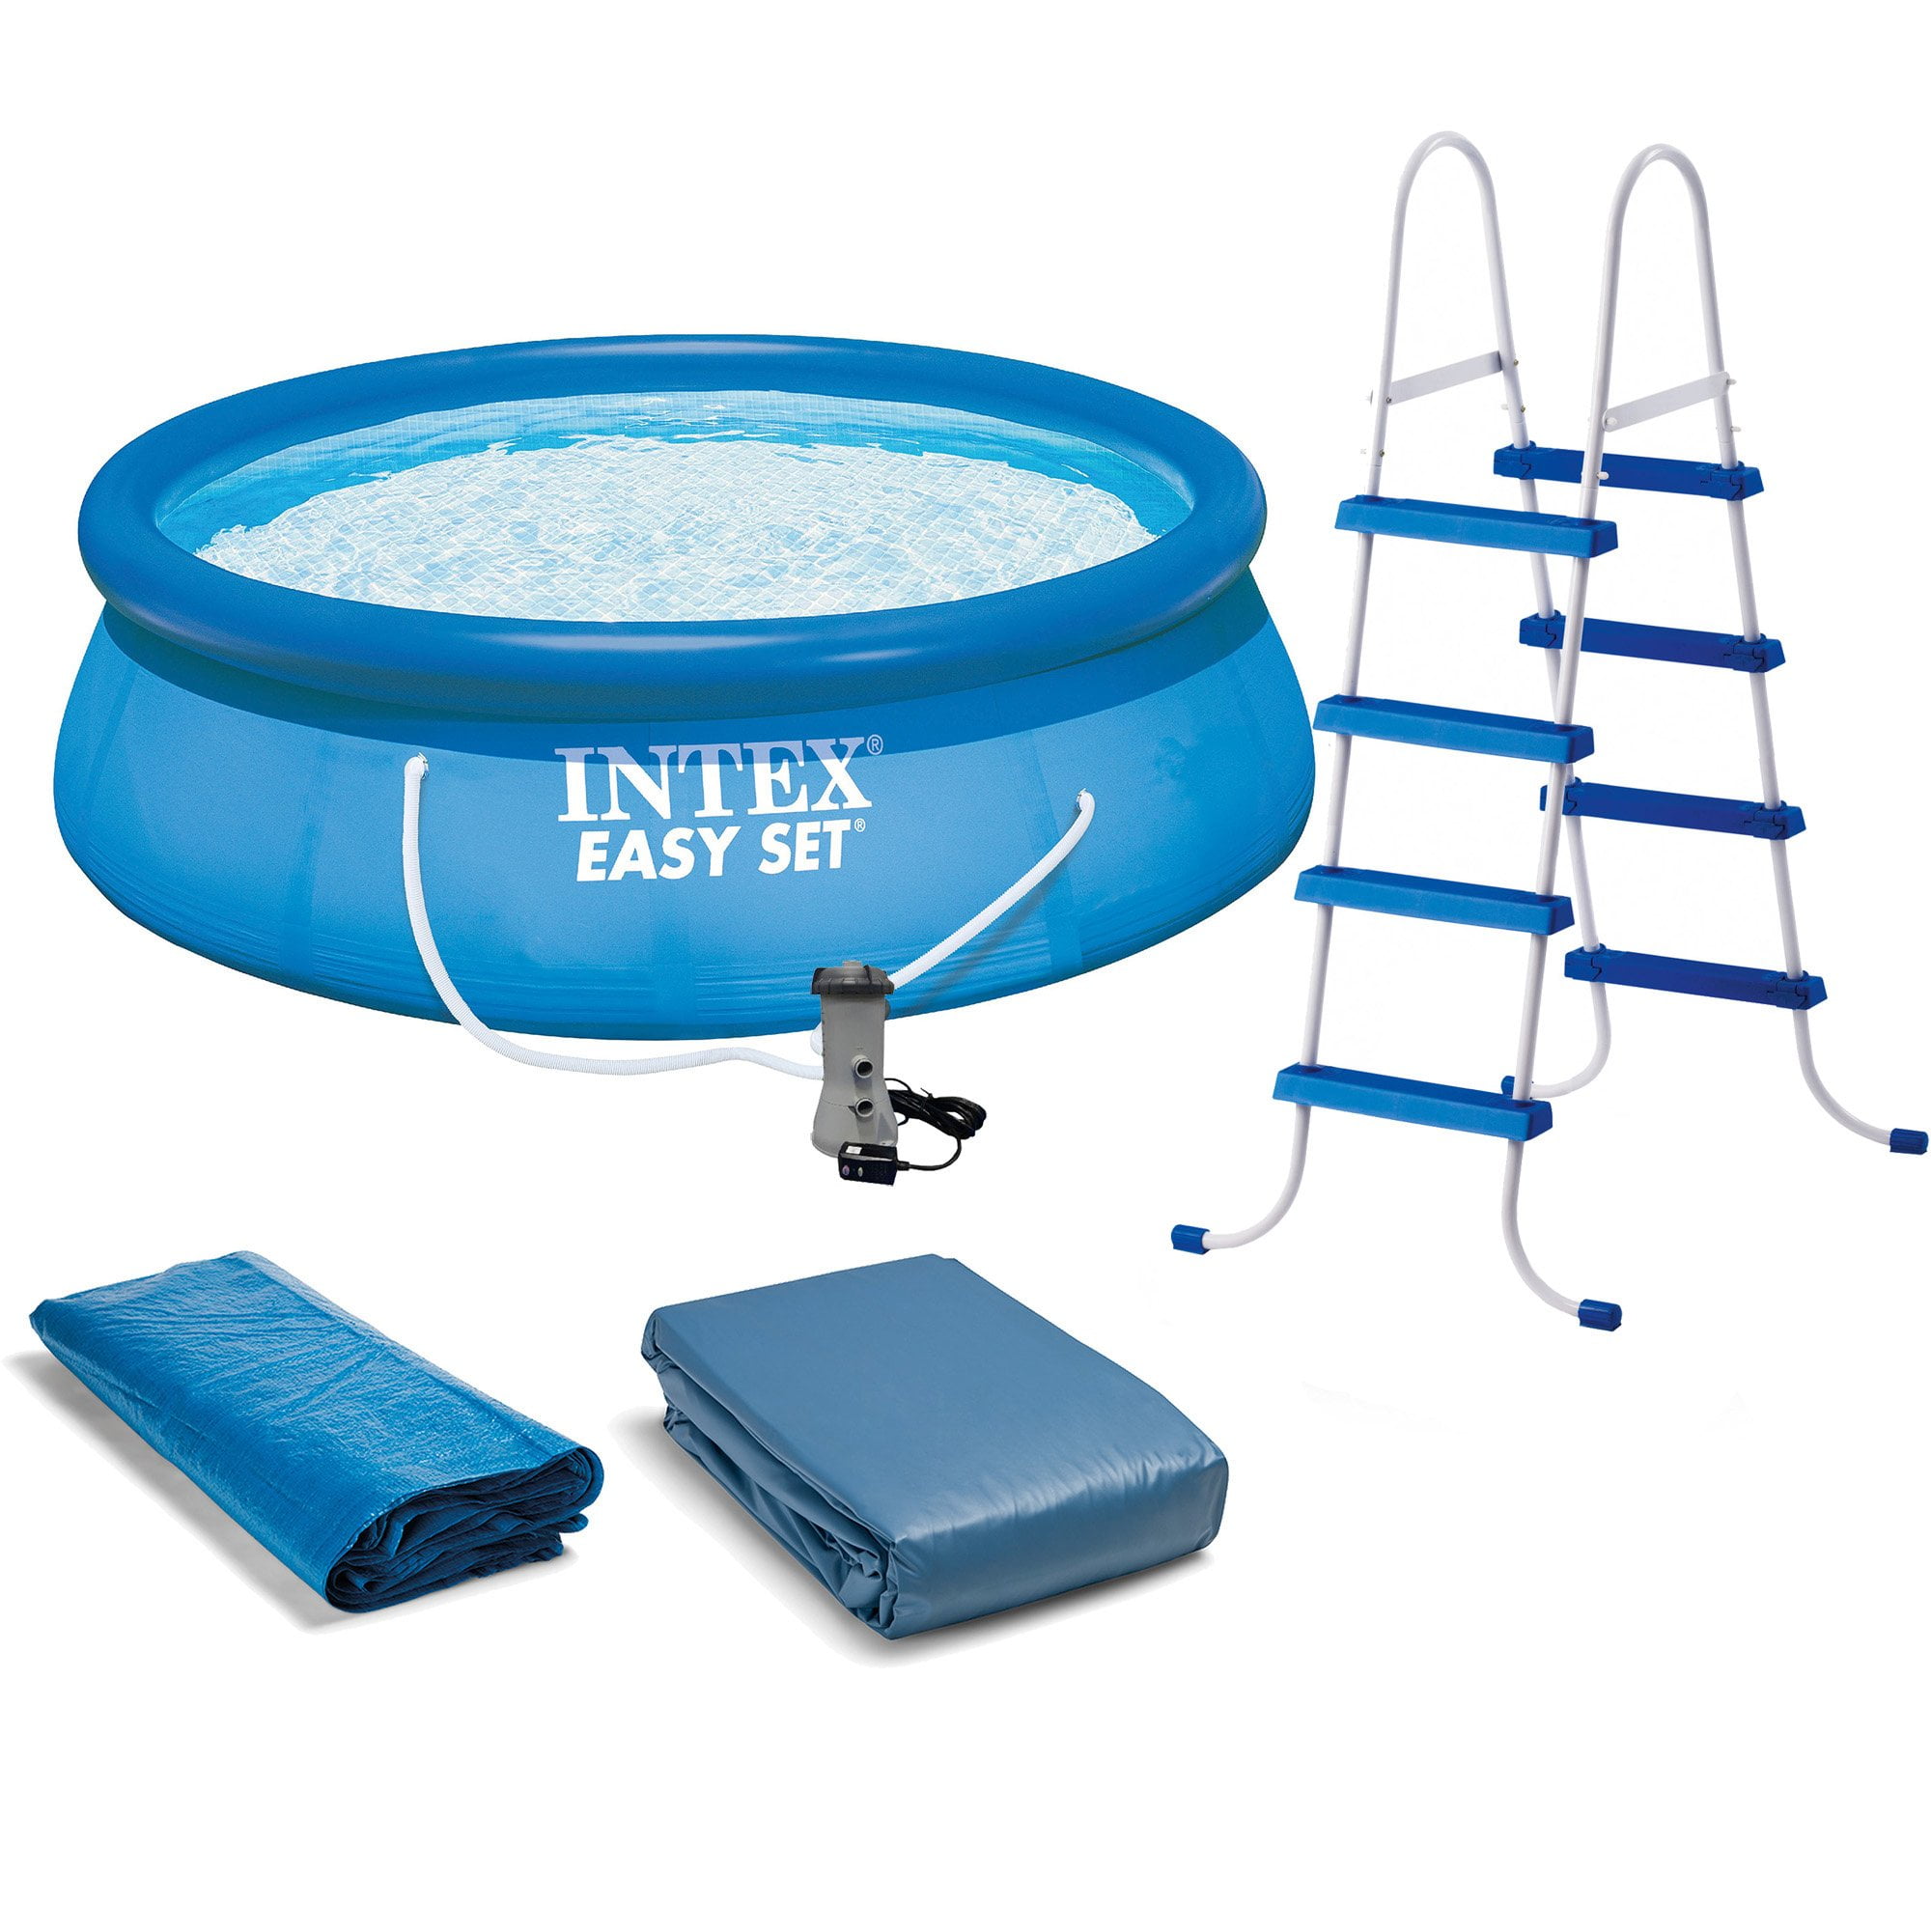 INTEX Easy-Set 15’ x 48’ Round Inflatable Outdoor Above-Ground Pool